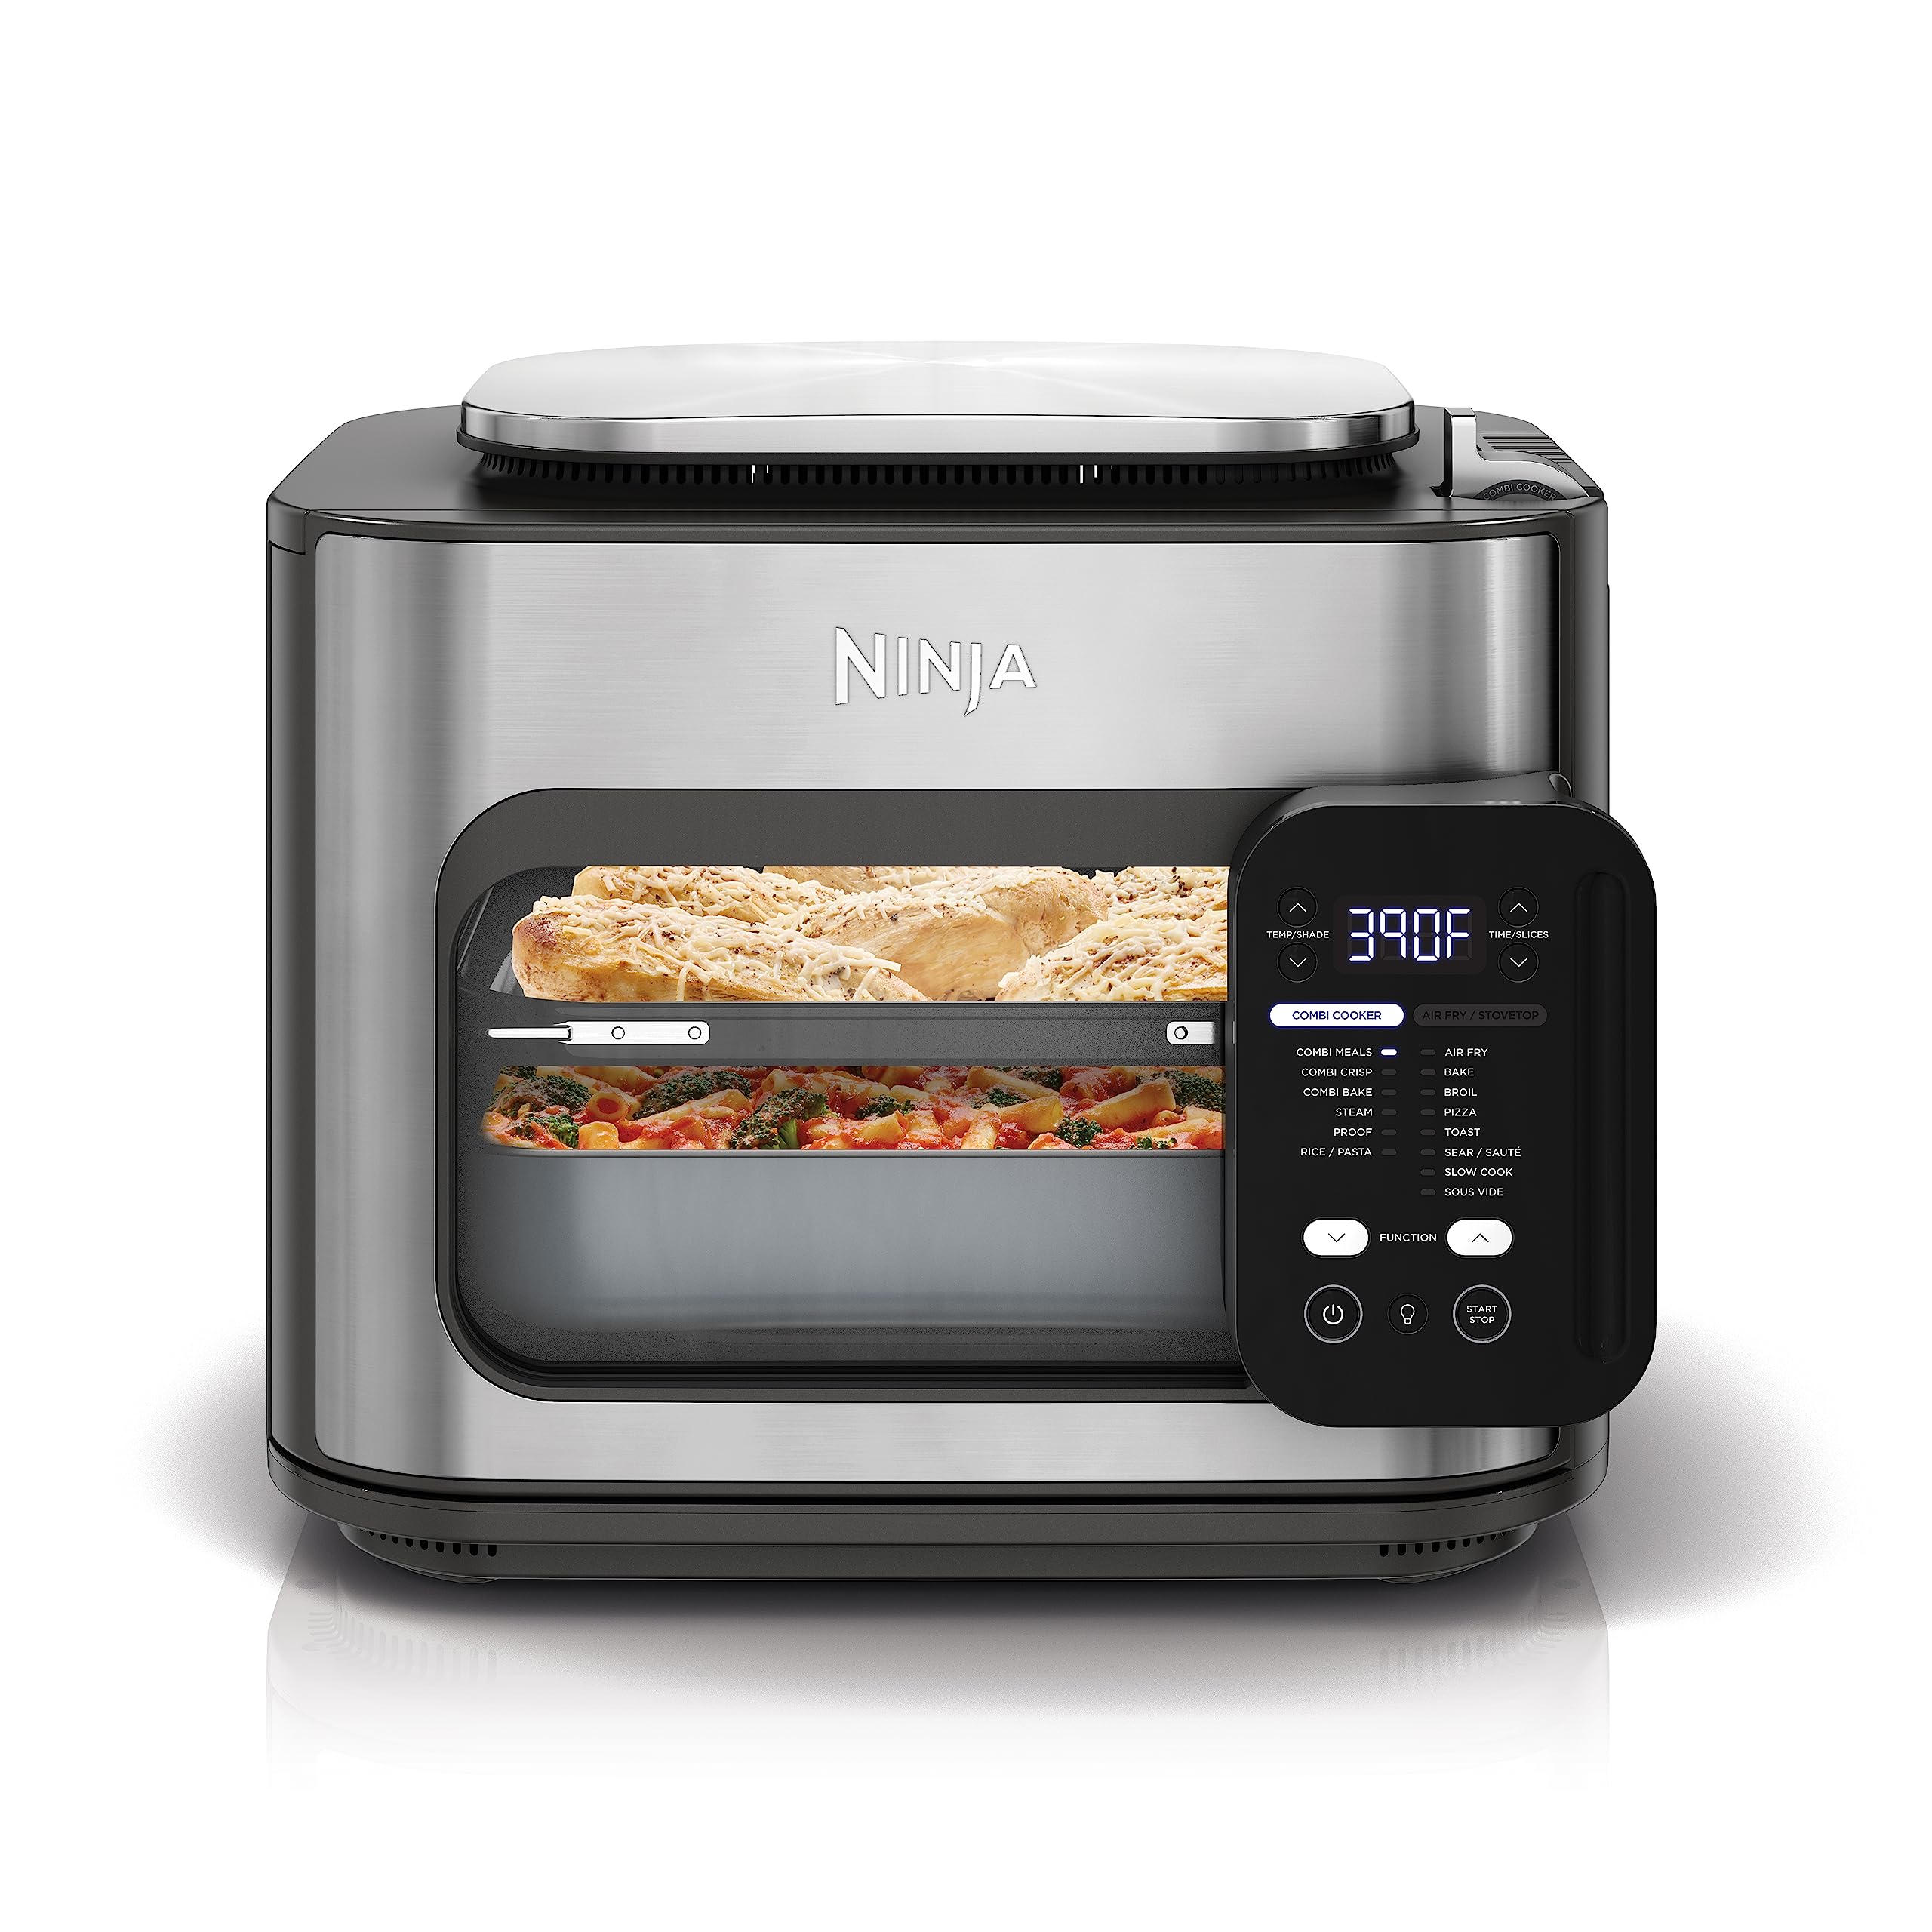 Ninja SFP701 Combi All-in-One Multicooker, Oven, and Ai...